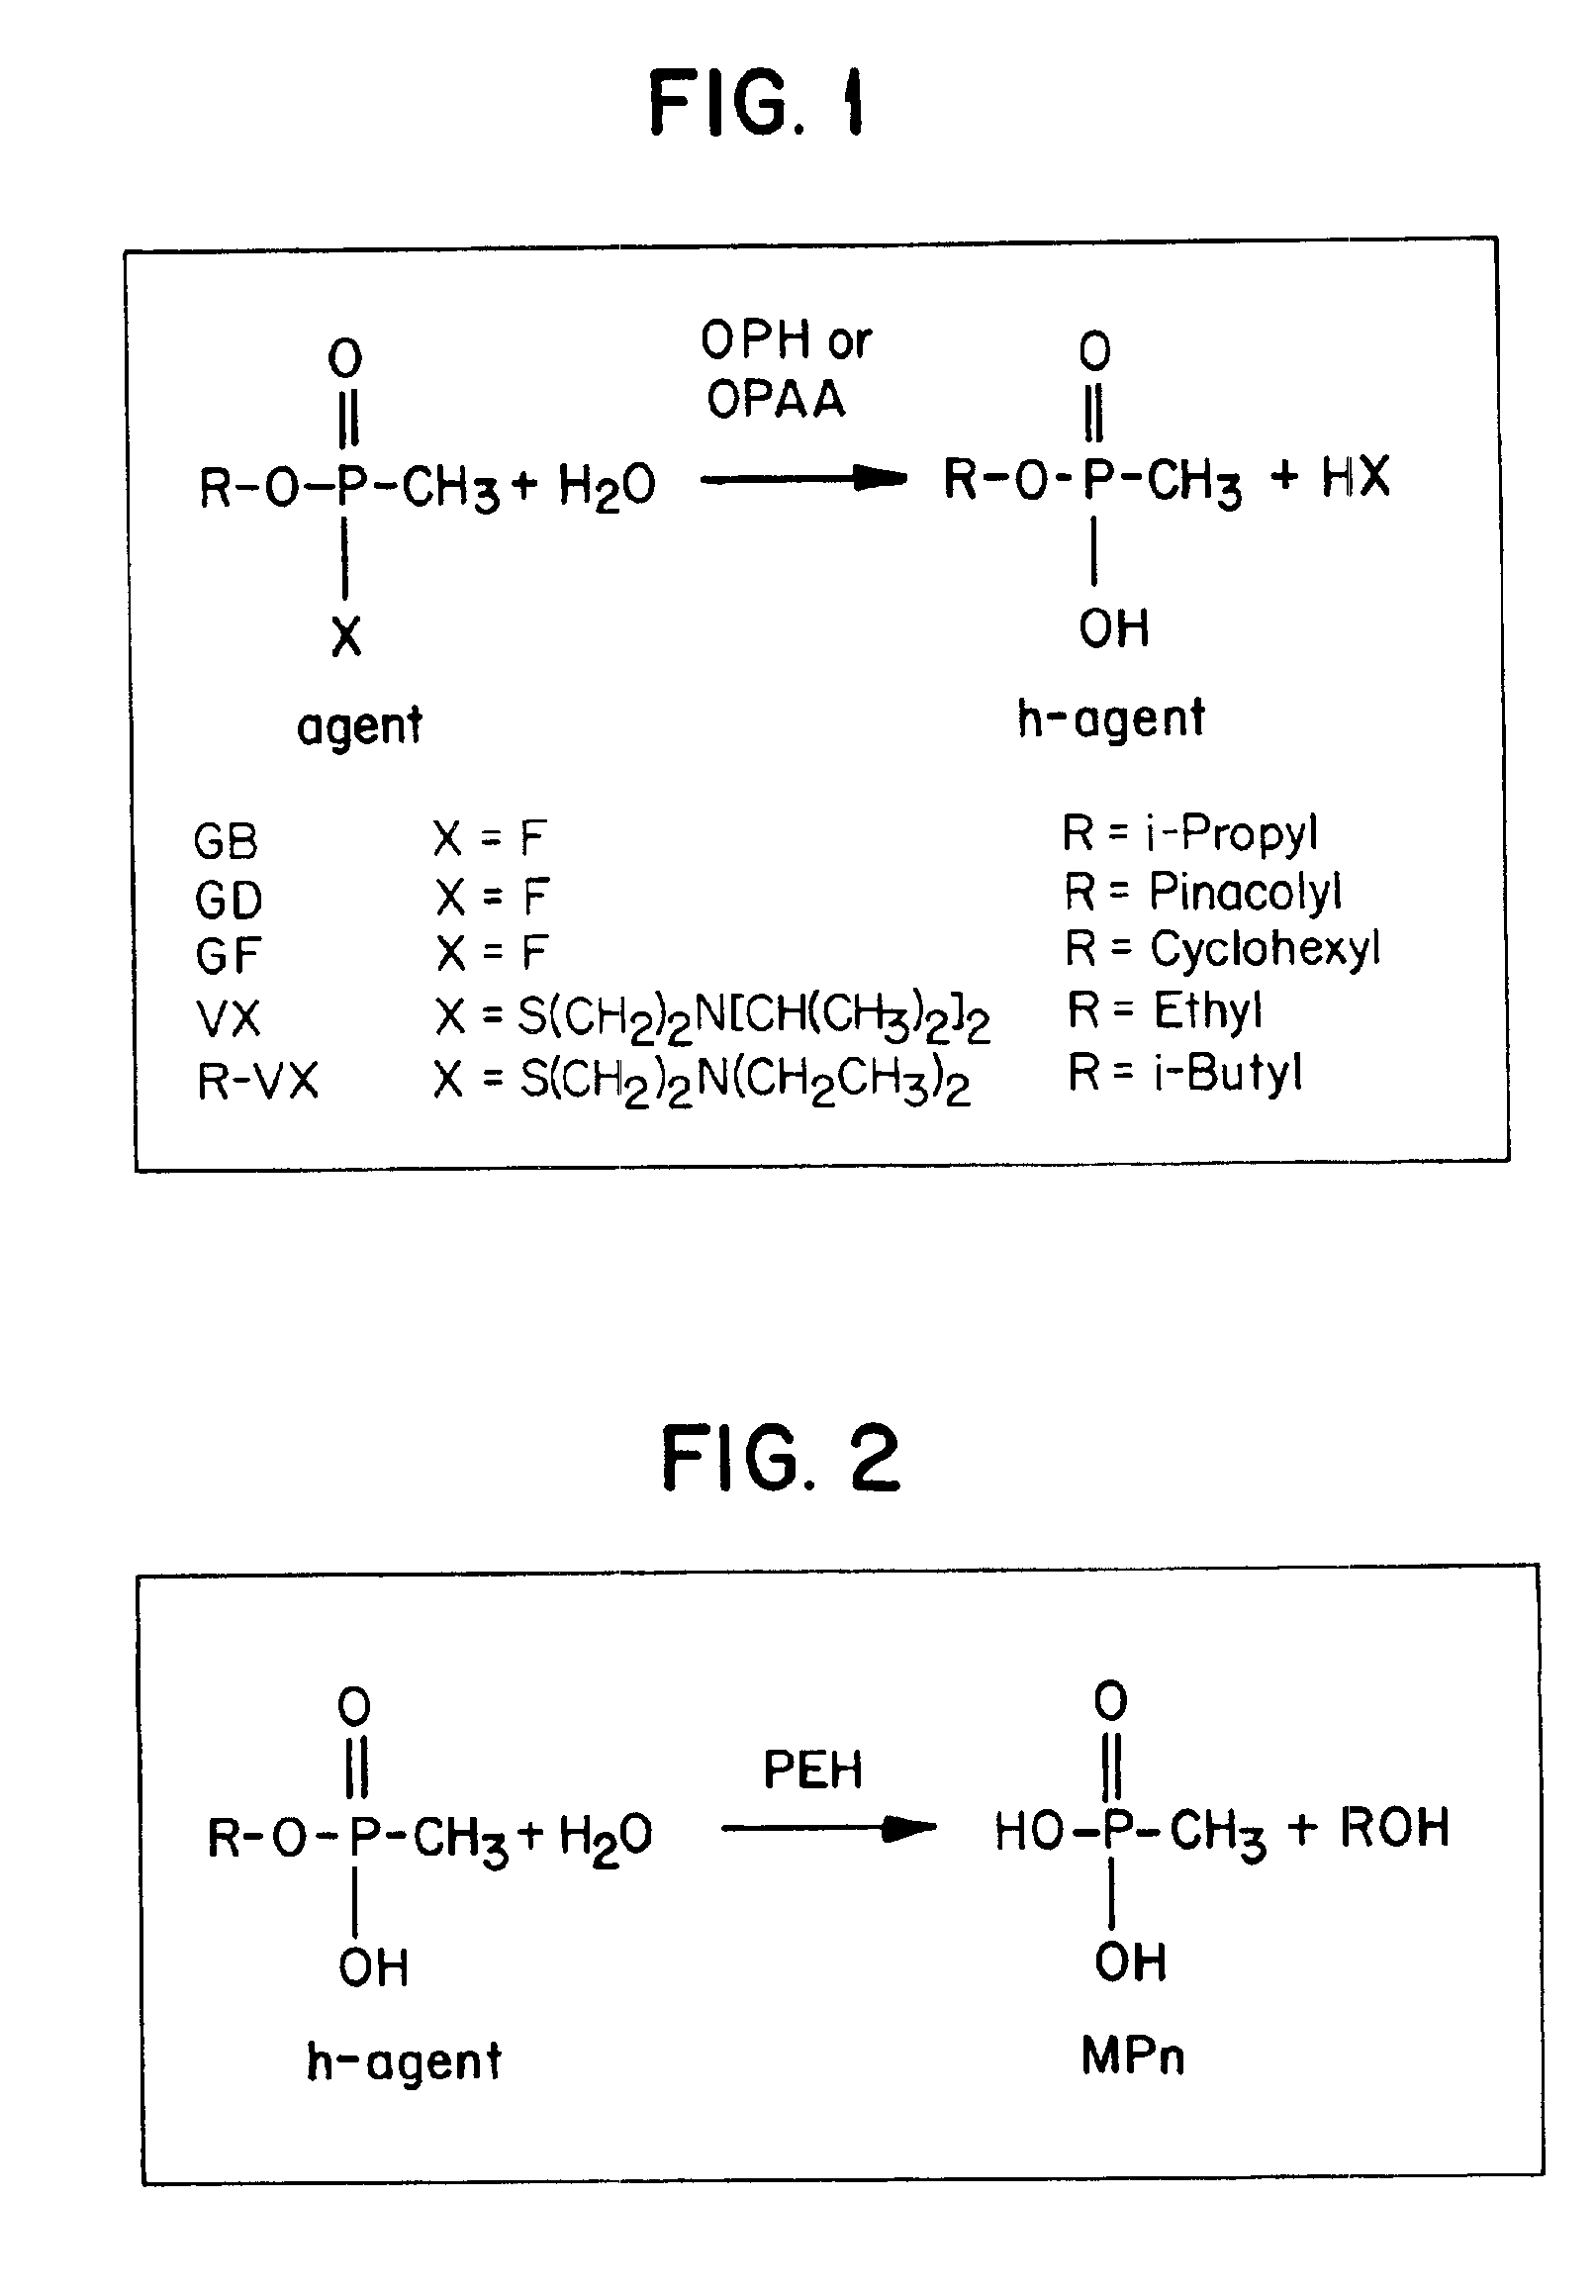 Method for detecting G- and V-agents of chemical warfare and their degradation products